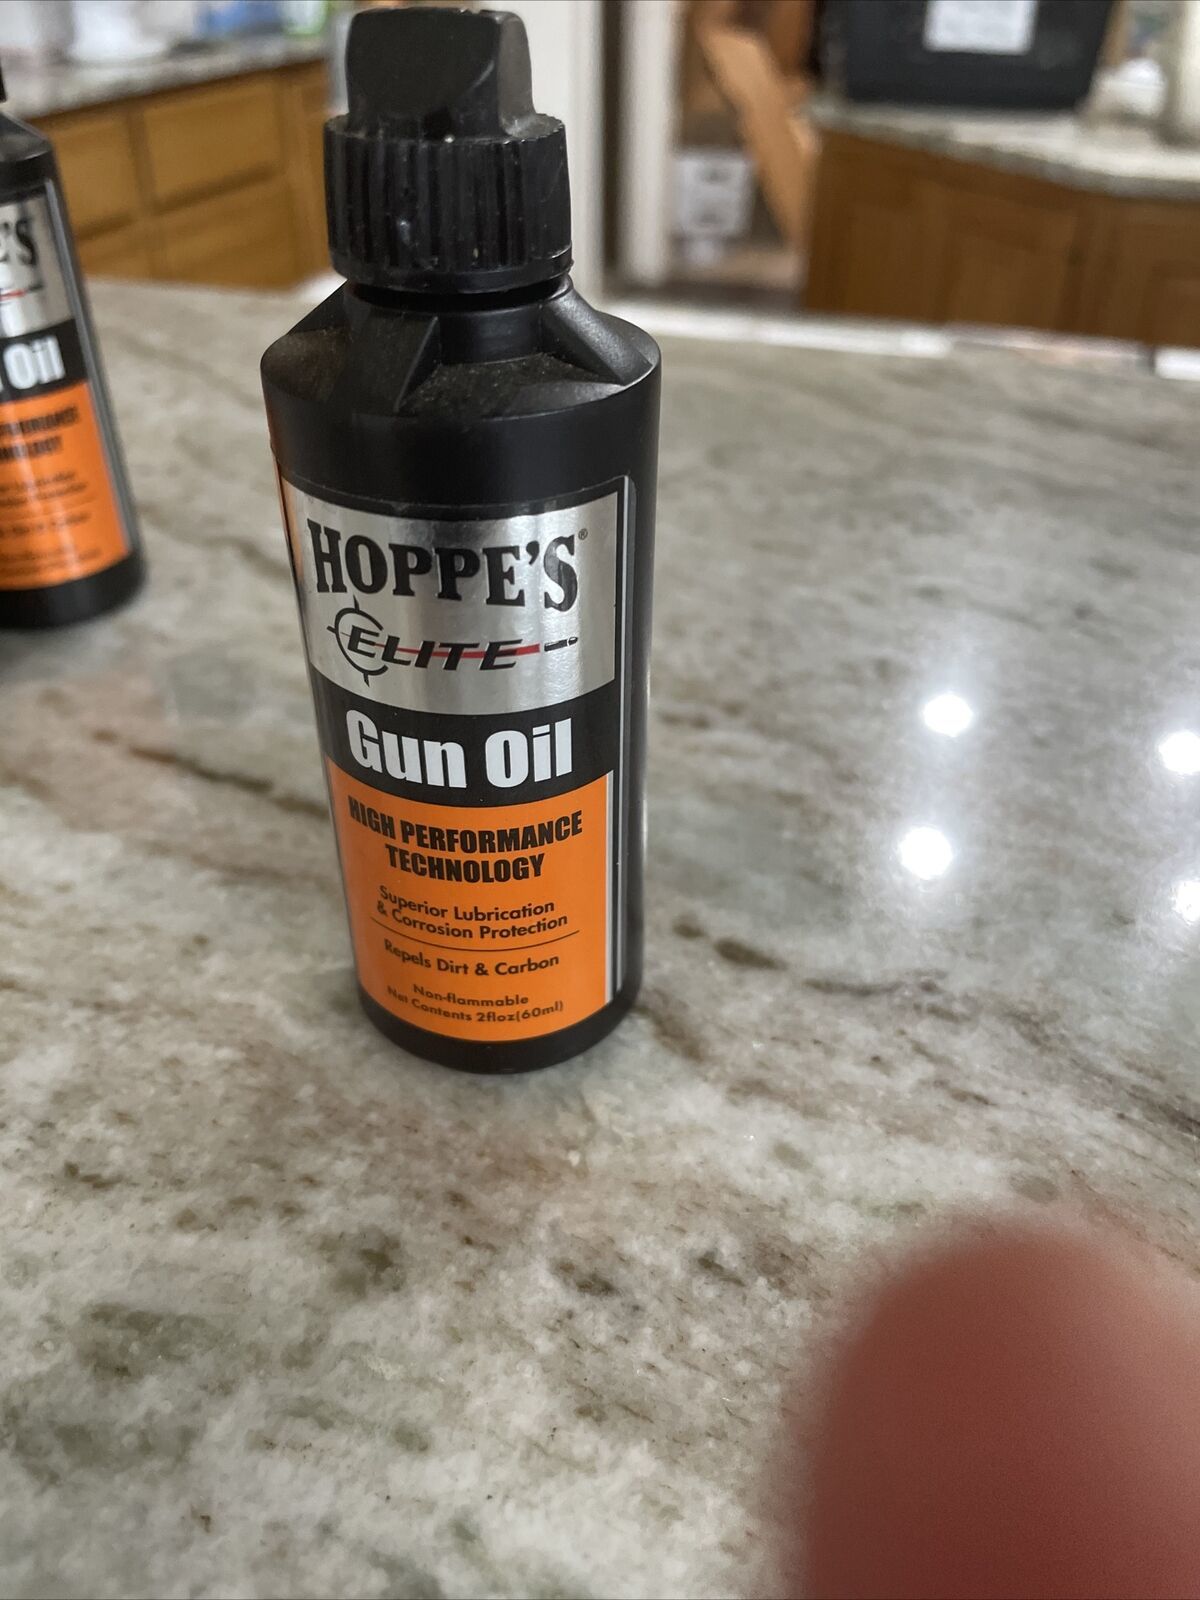 Primary image for Hoppe's ELITE GUN OIL HIGH PERFORMANCE TECHNOLOGY Lubrication Protection